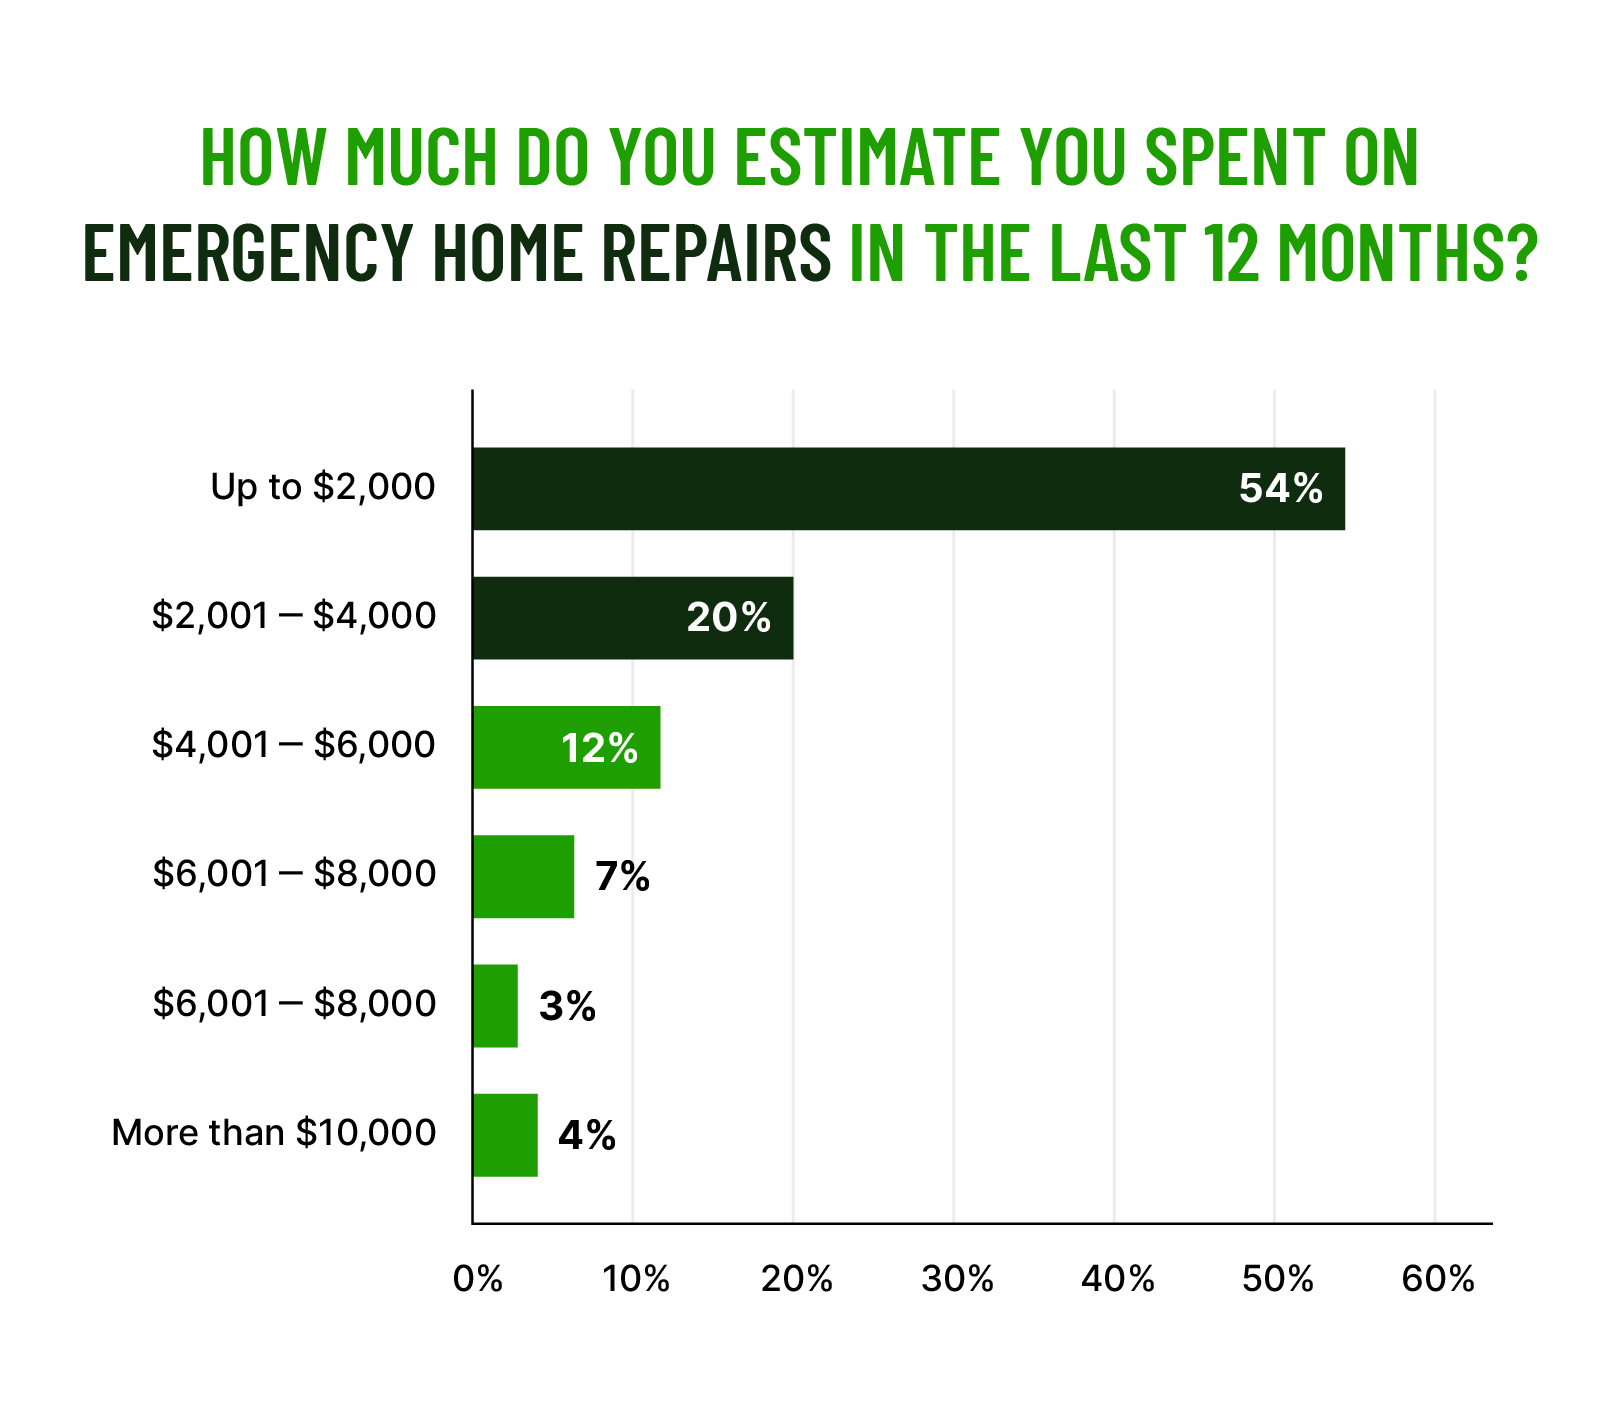 horizontal bar chart showing how much homeowners estimated they spent on emergency home repairs in the last 12 months